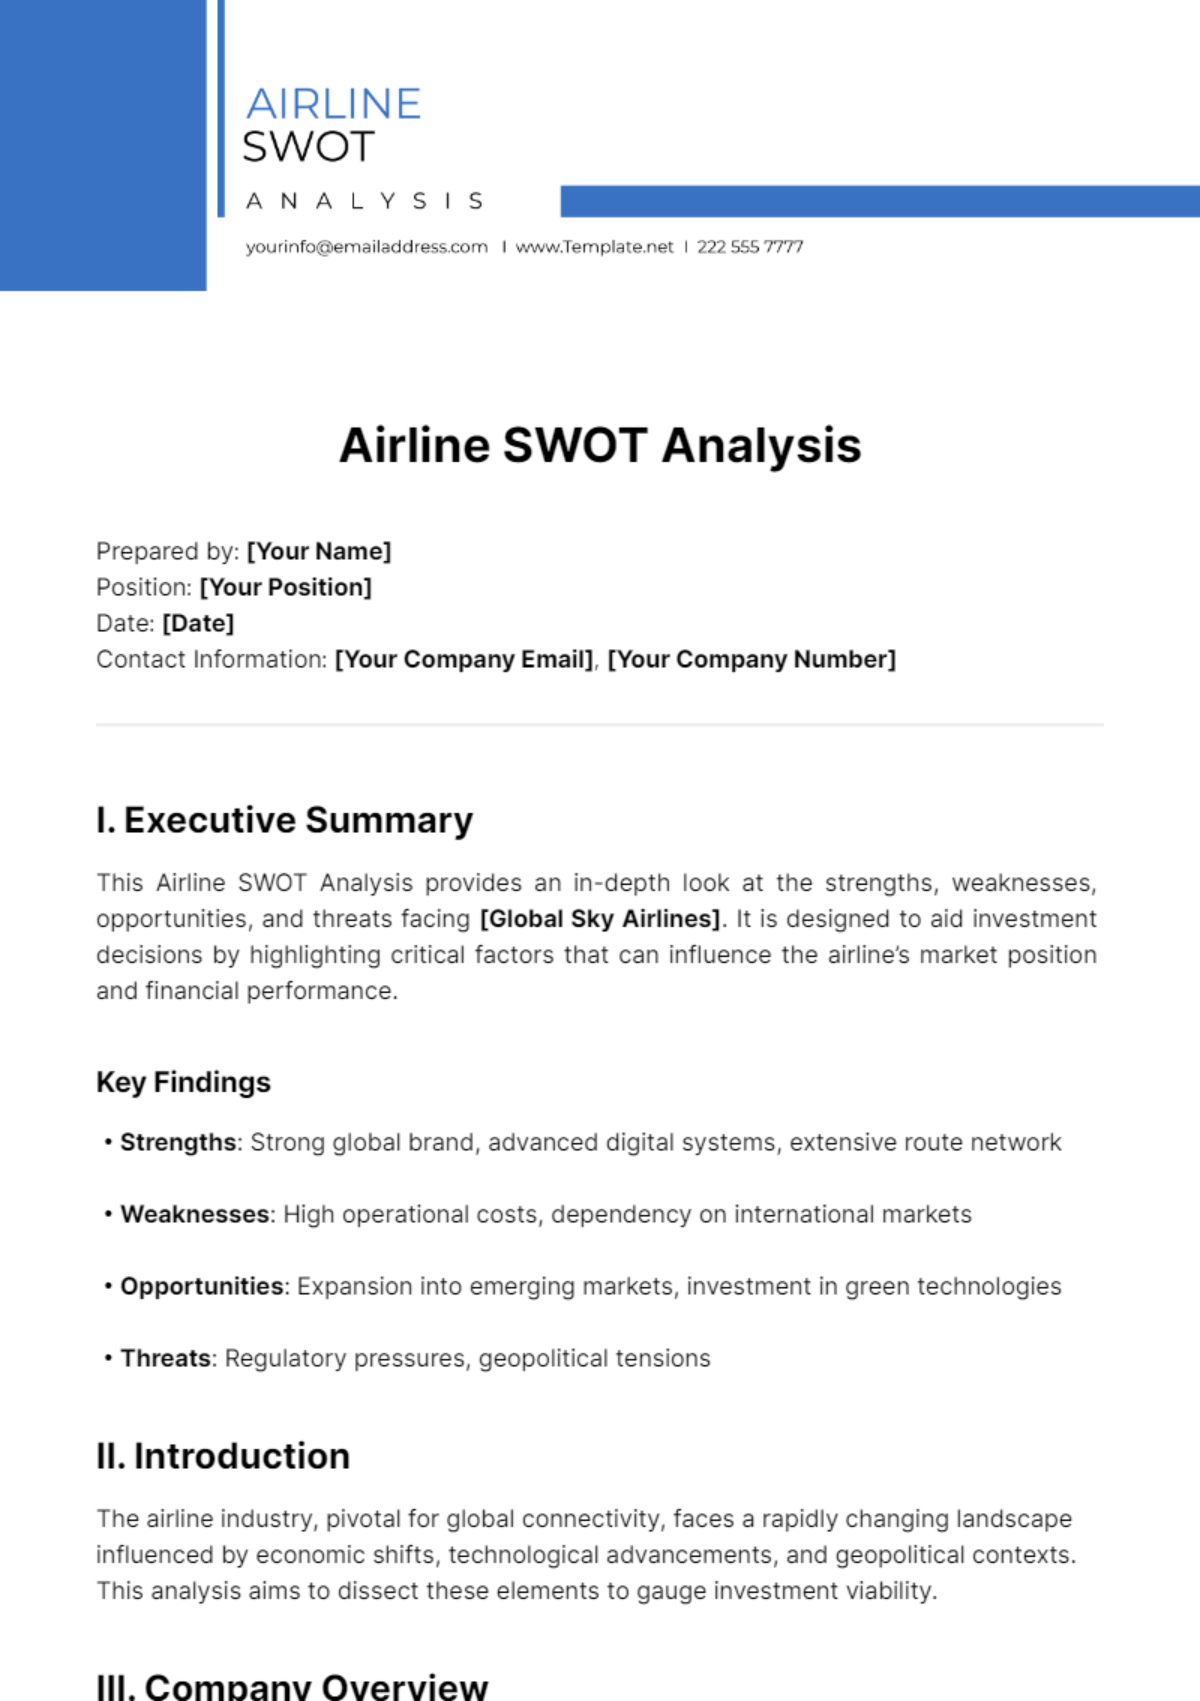 Free Airline SWOT Analysis Template